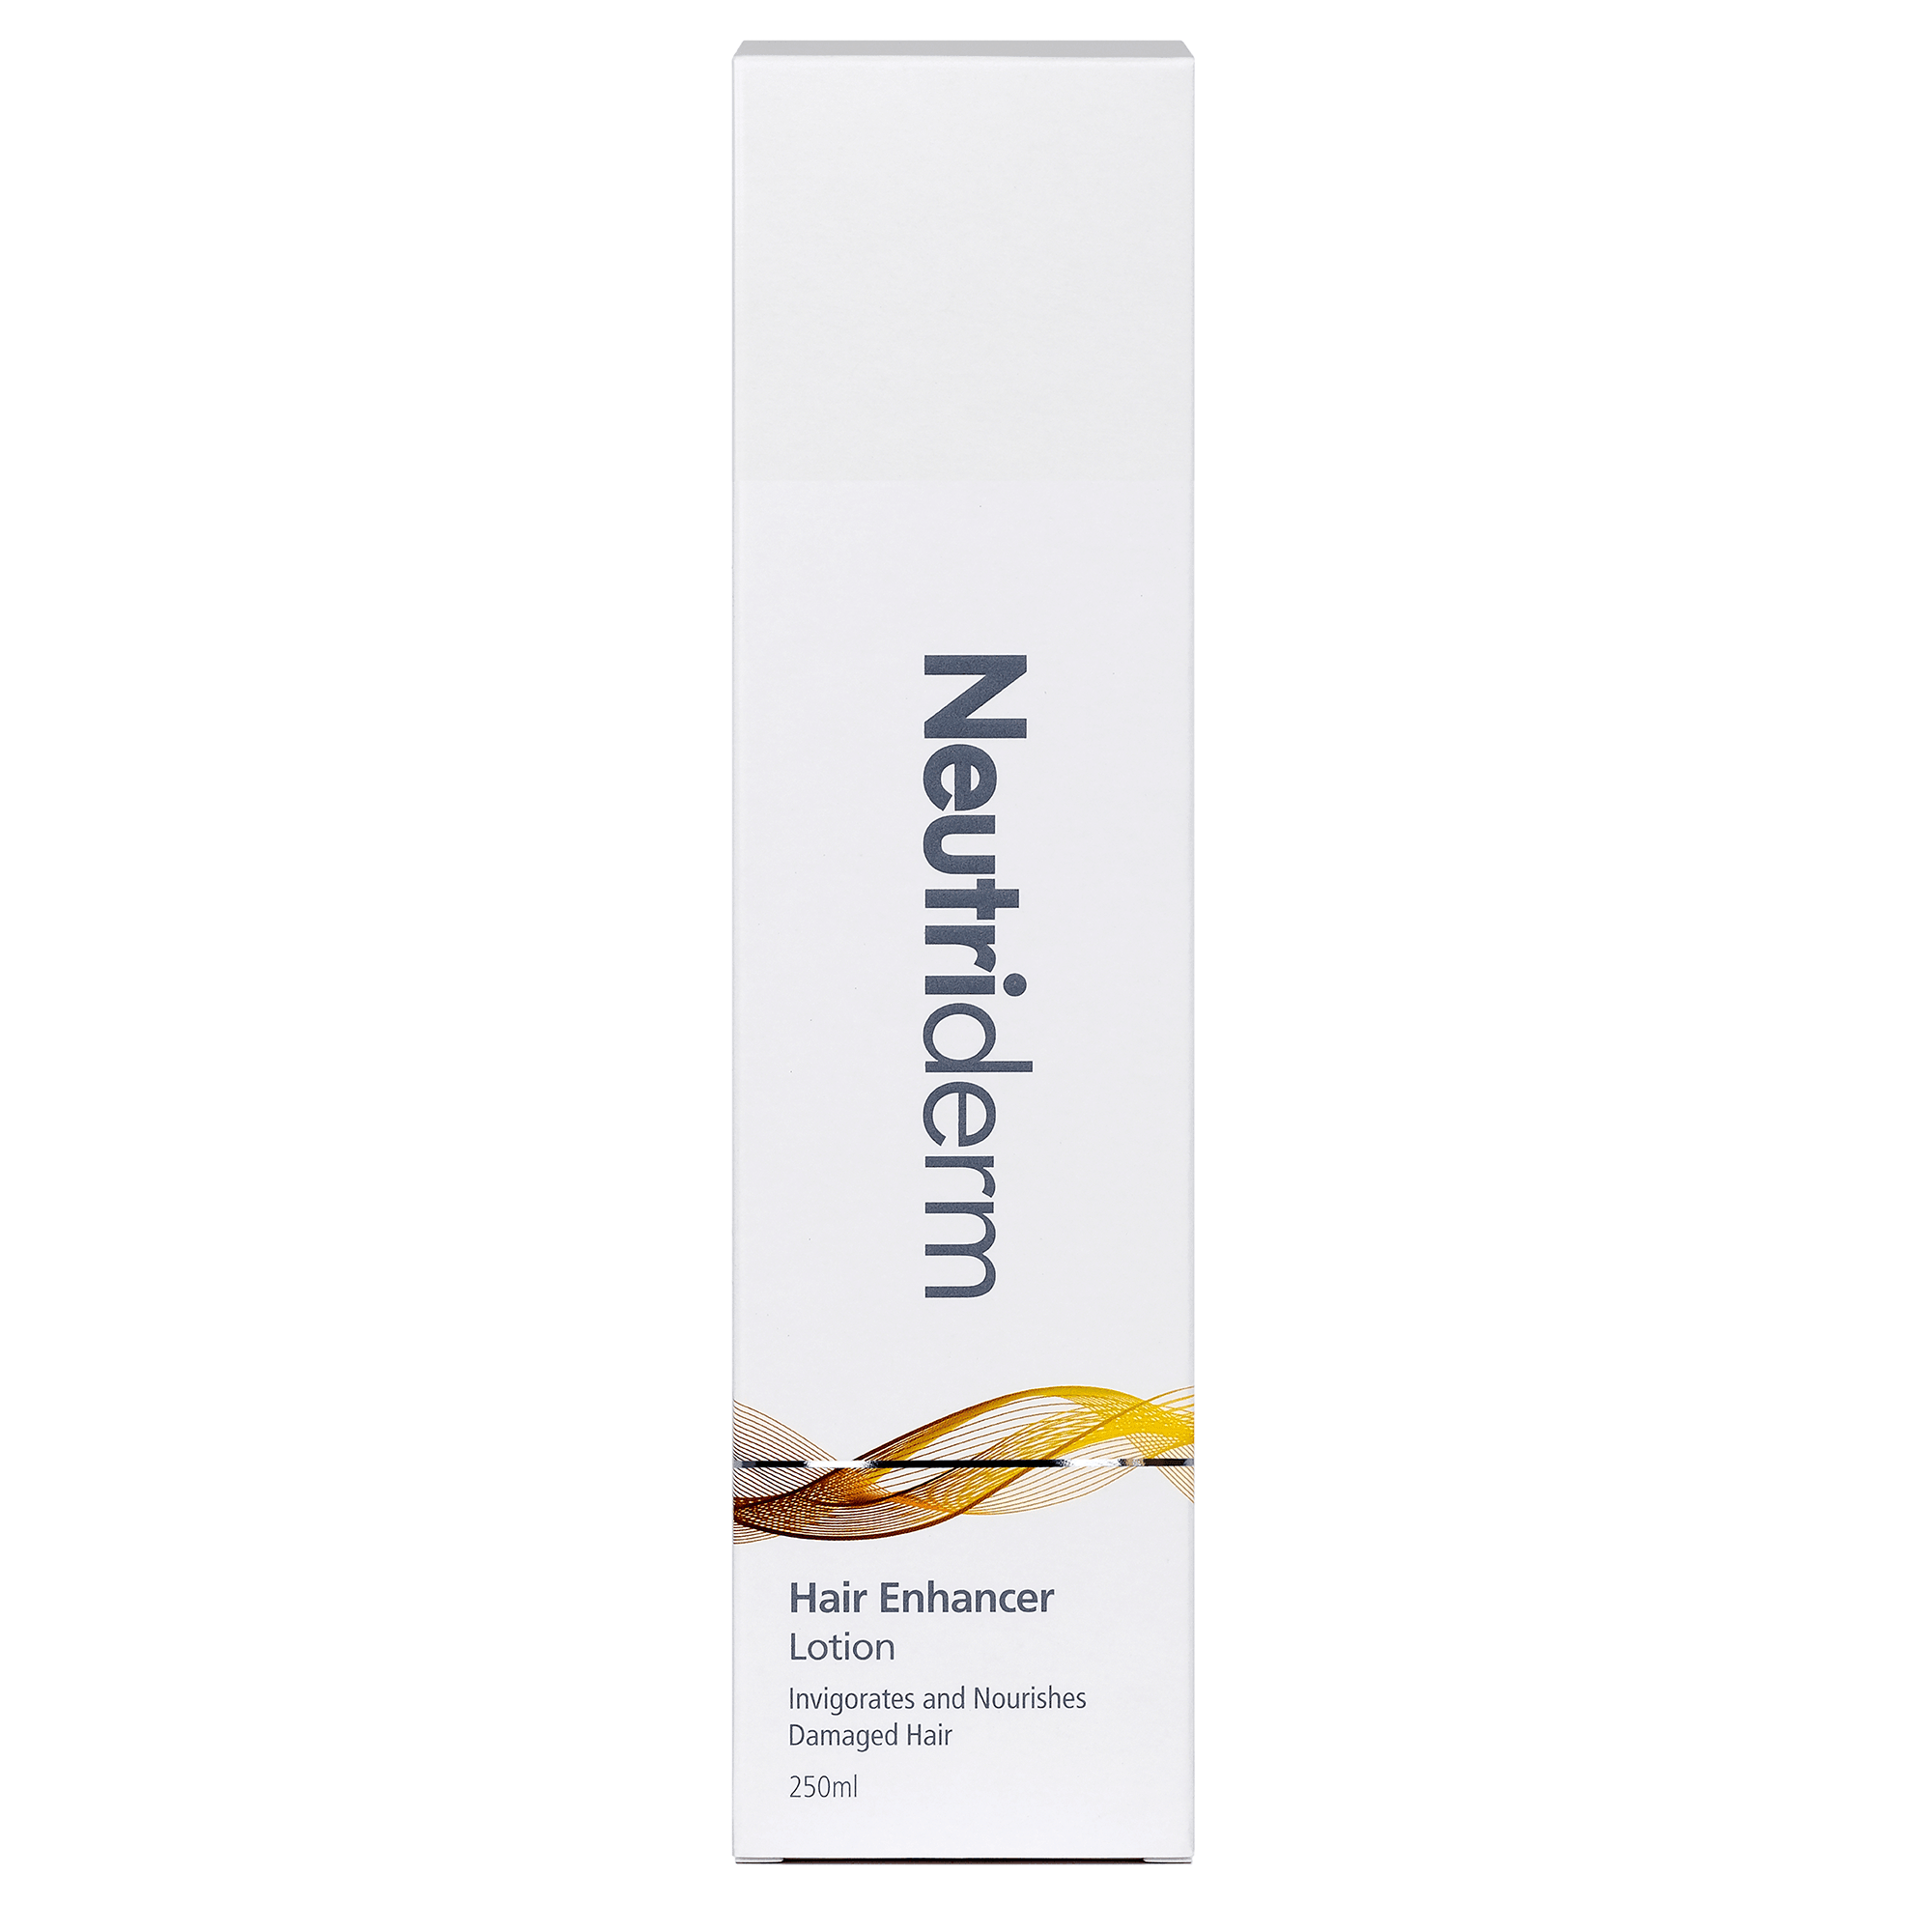 Buy Neutriderm Hair Enhancer Lotion  250 mL Online at Low Prices in India   Amazonin